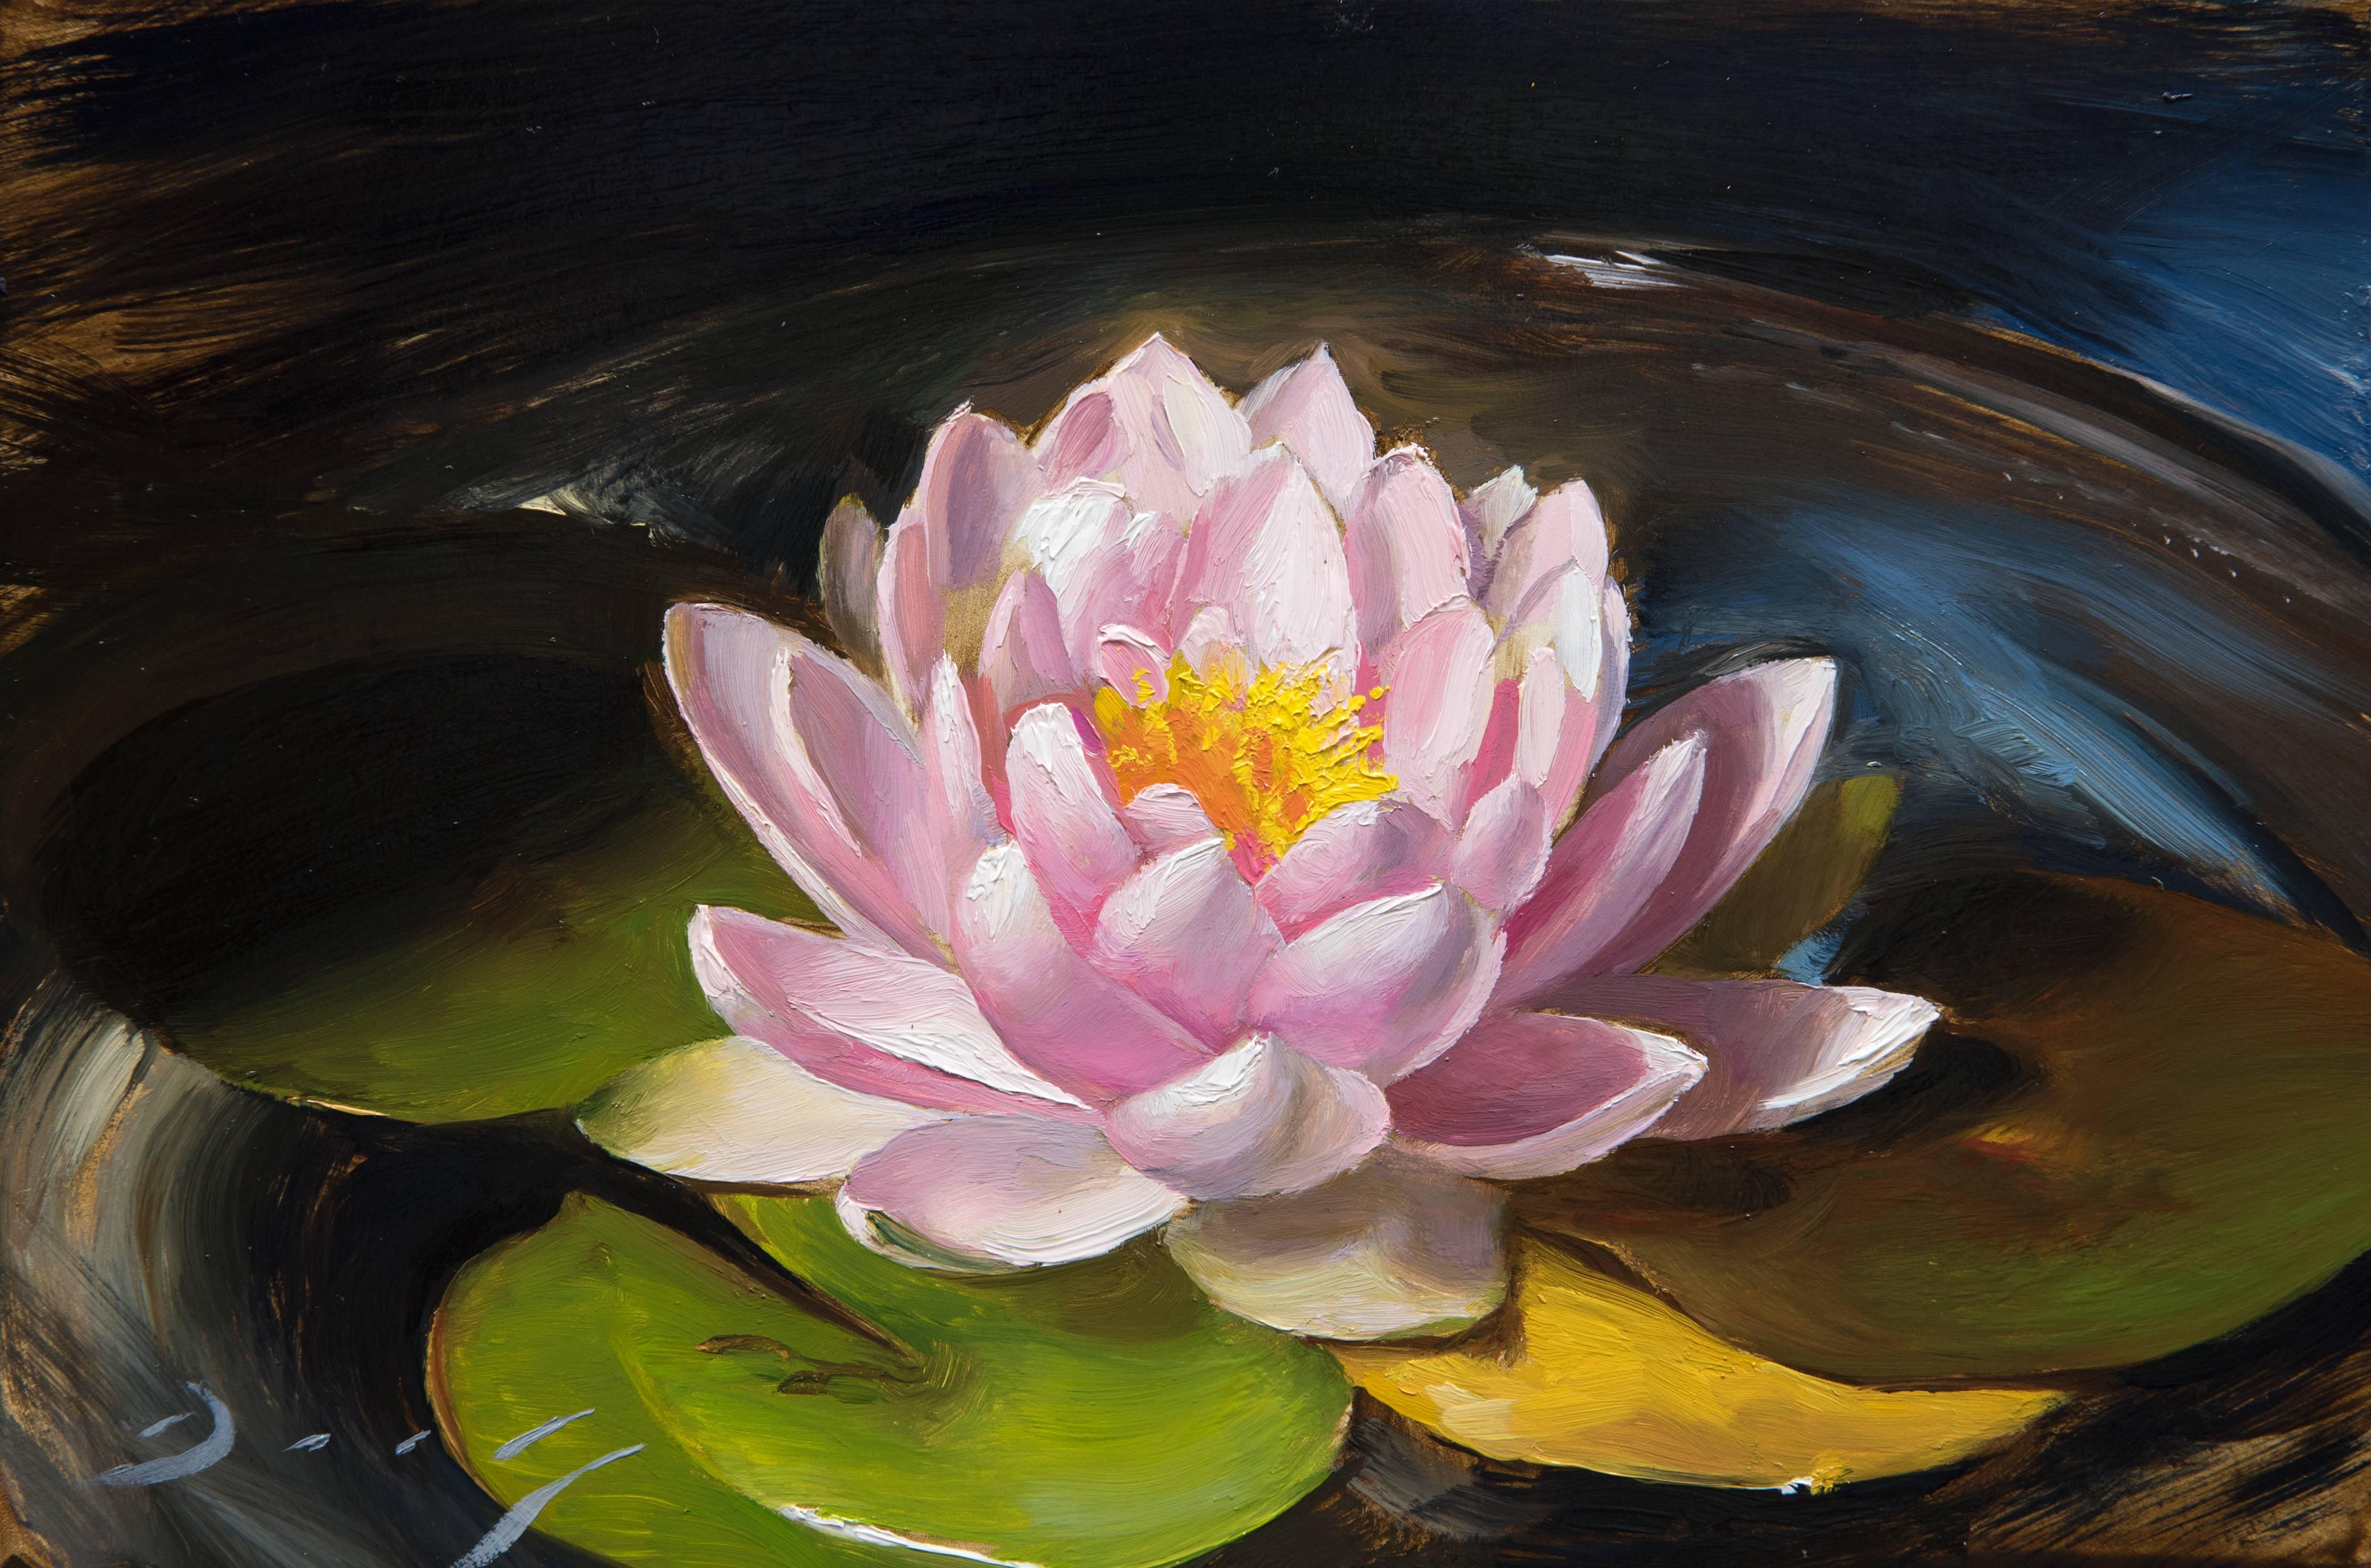 Joseph Q. Daily Still-Life Painting - Realist pink white and yellow flower, "Water Lily", oil on panel, small scale